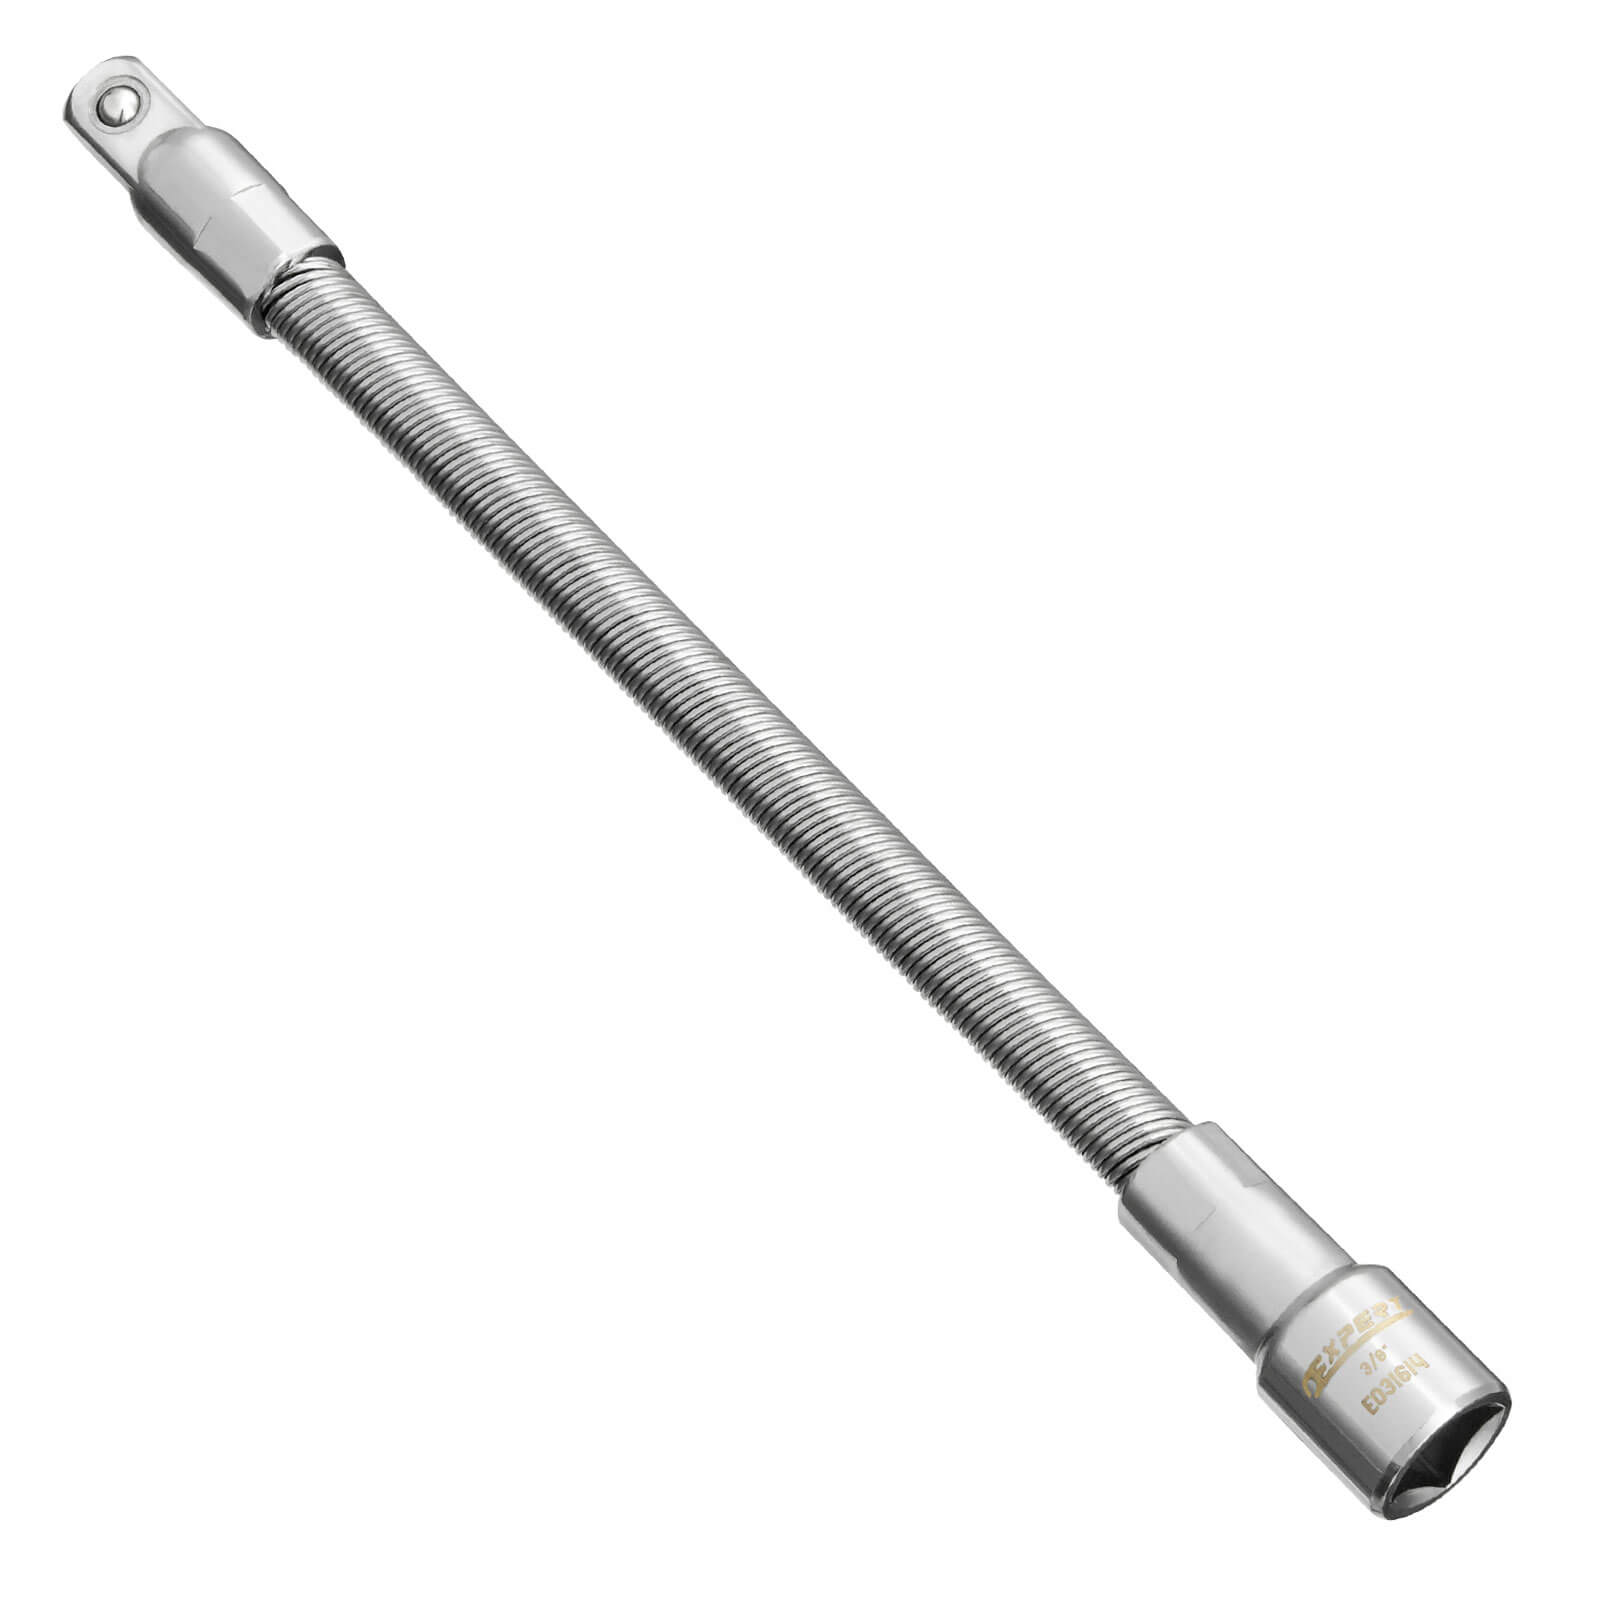 Image of Expert by Facom 3/8" Drive Flexible Socket Extension Bar 3/8" 200mm